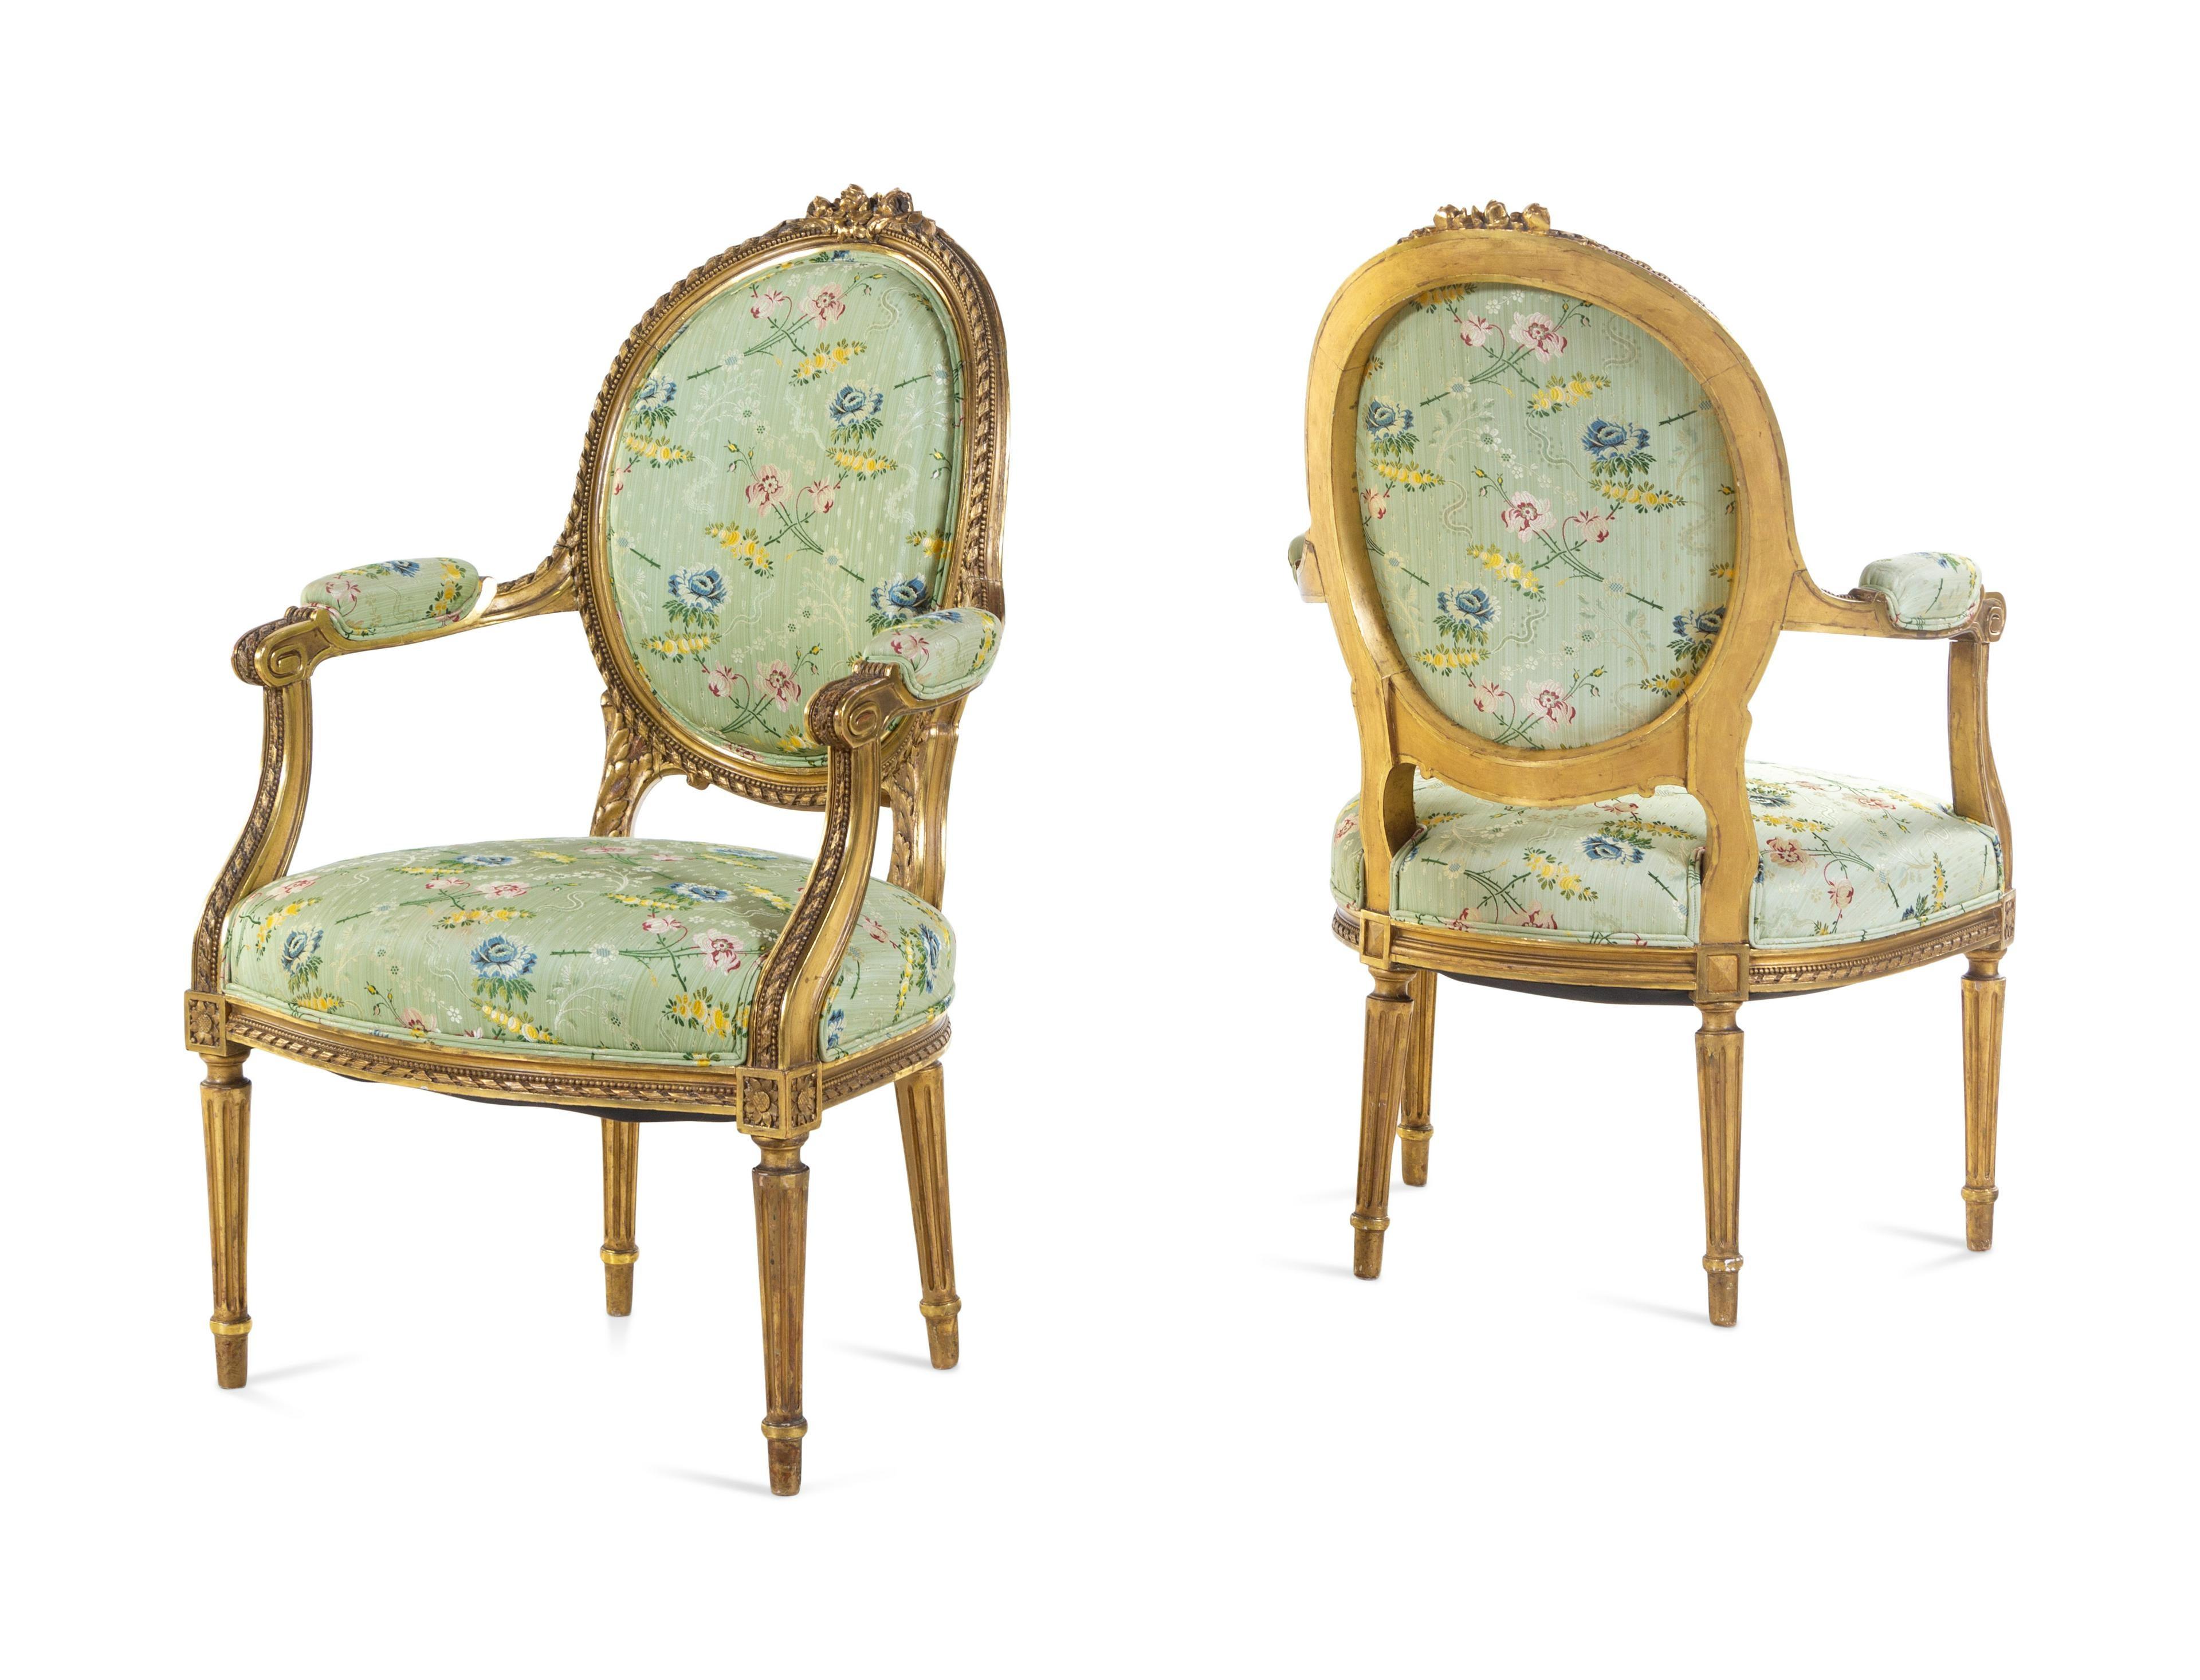 Set of 4 Early 19th Century French Louis XVI Giltwood Oval Back Armchairs 1